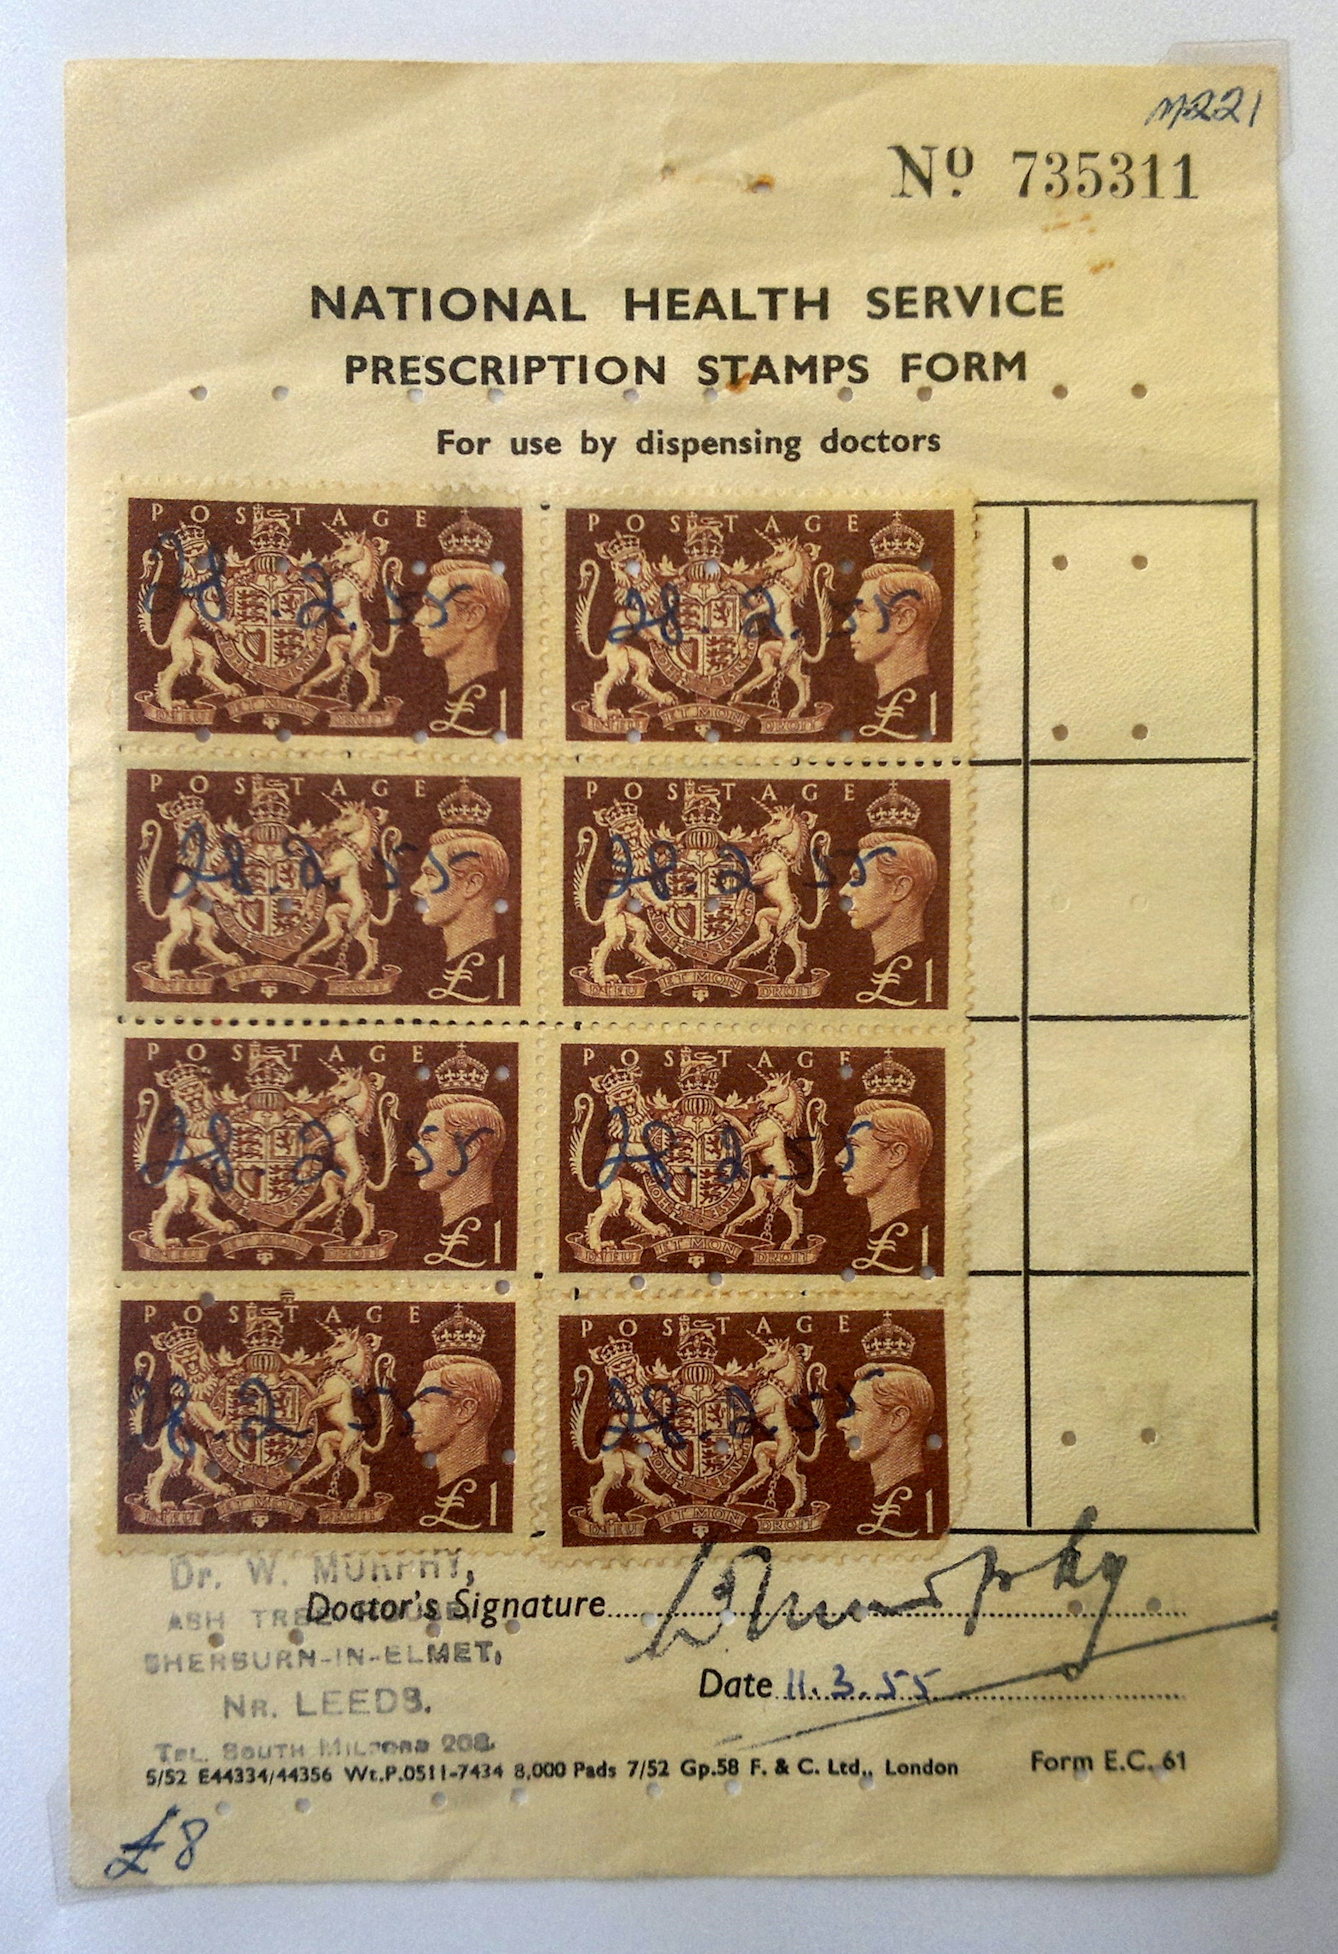 A photograph of a National Health Service prescription stamps form 